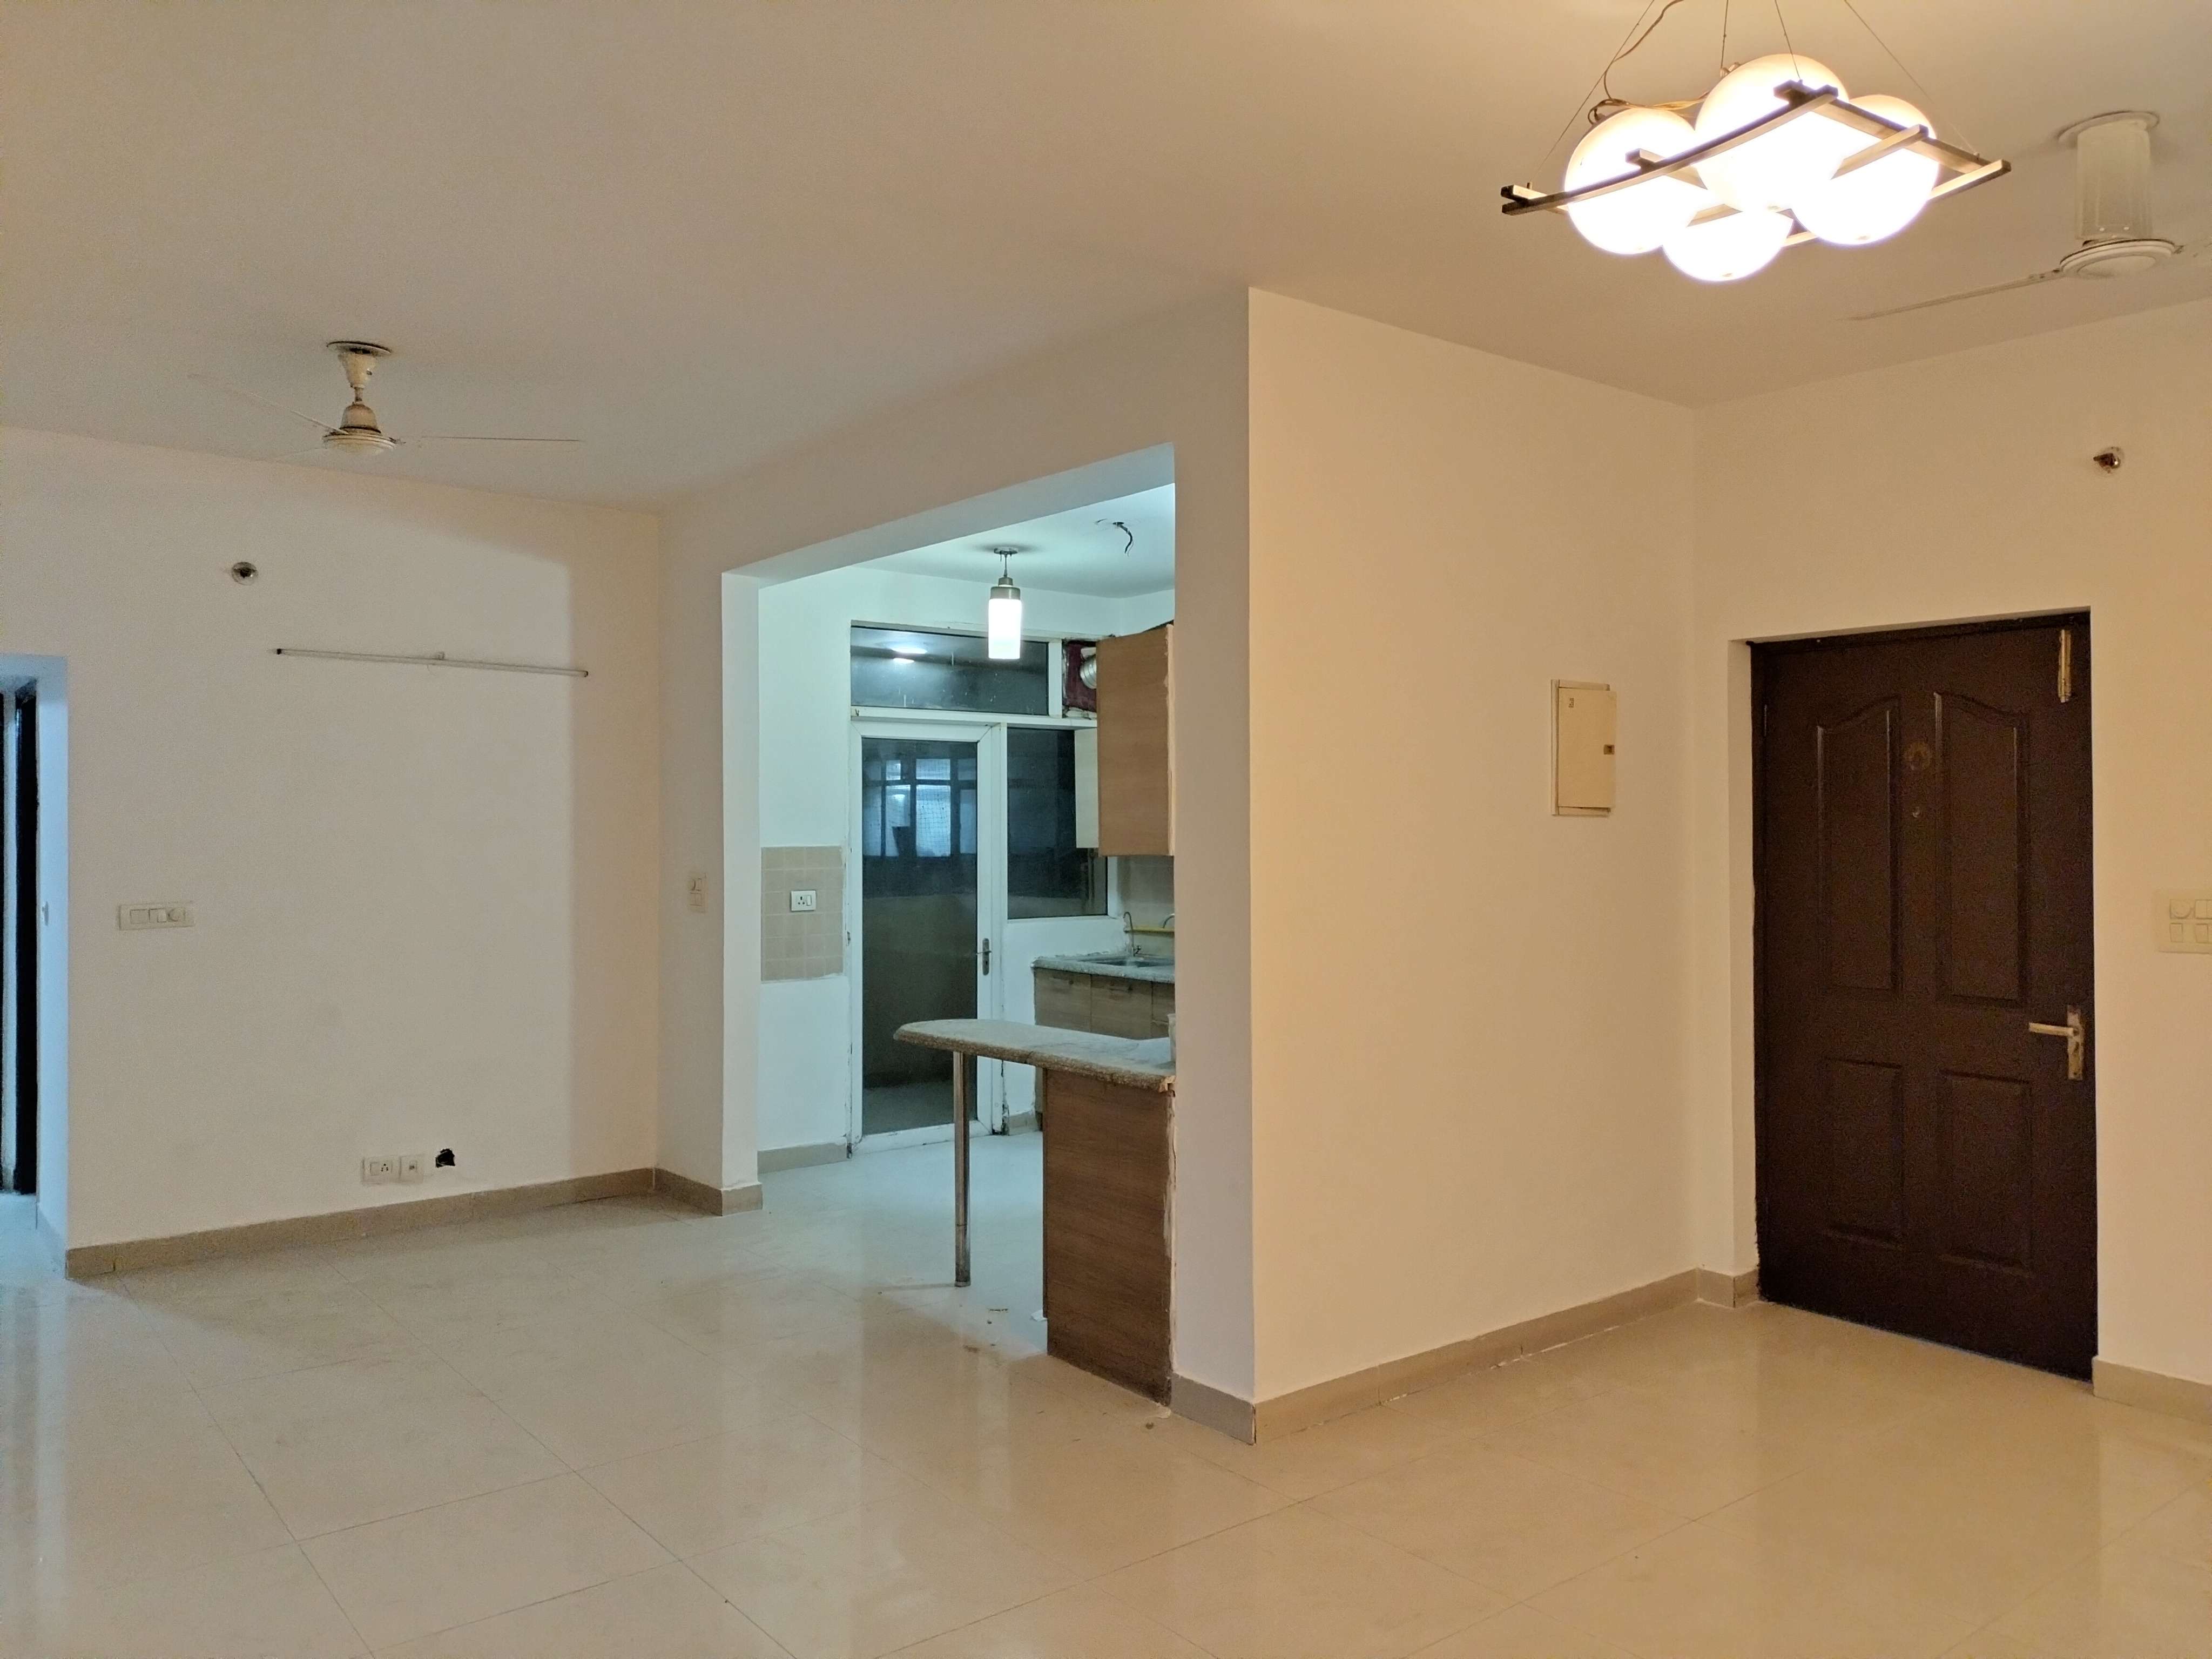 3 BHK Apartment For Rent in ABA Orange County Ahinsa Khand 1 Ghaziabad 6548172